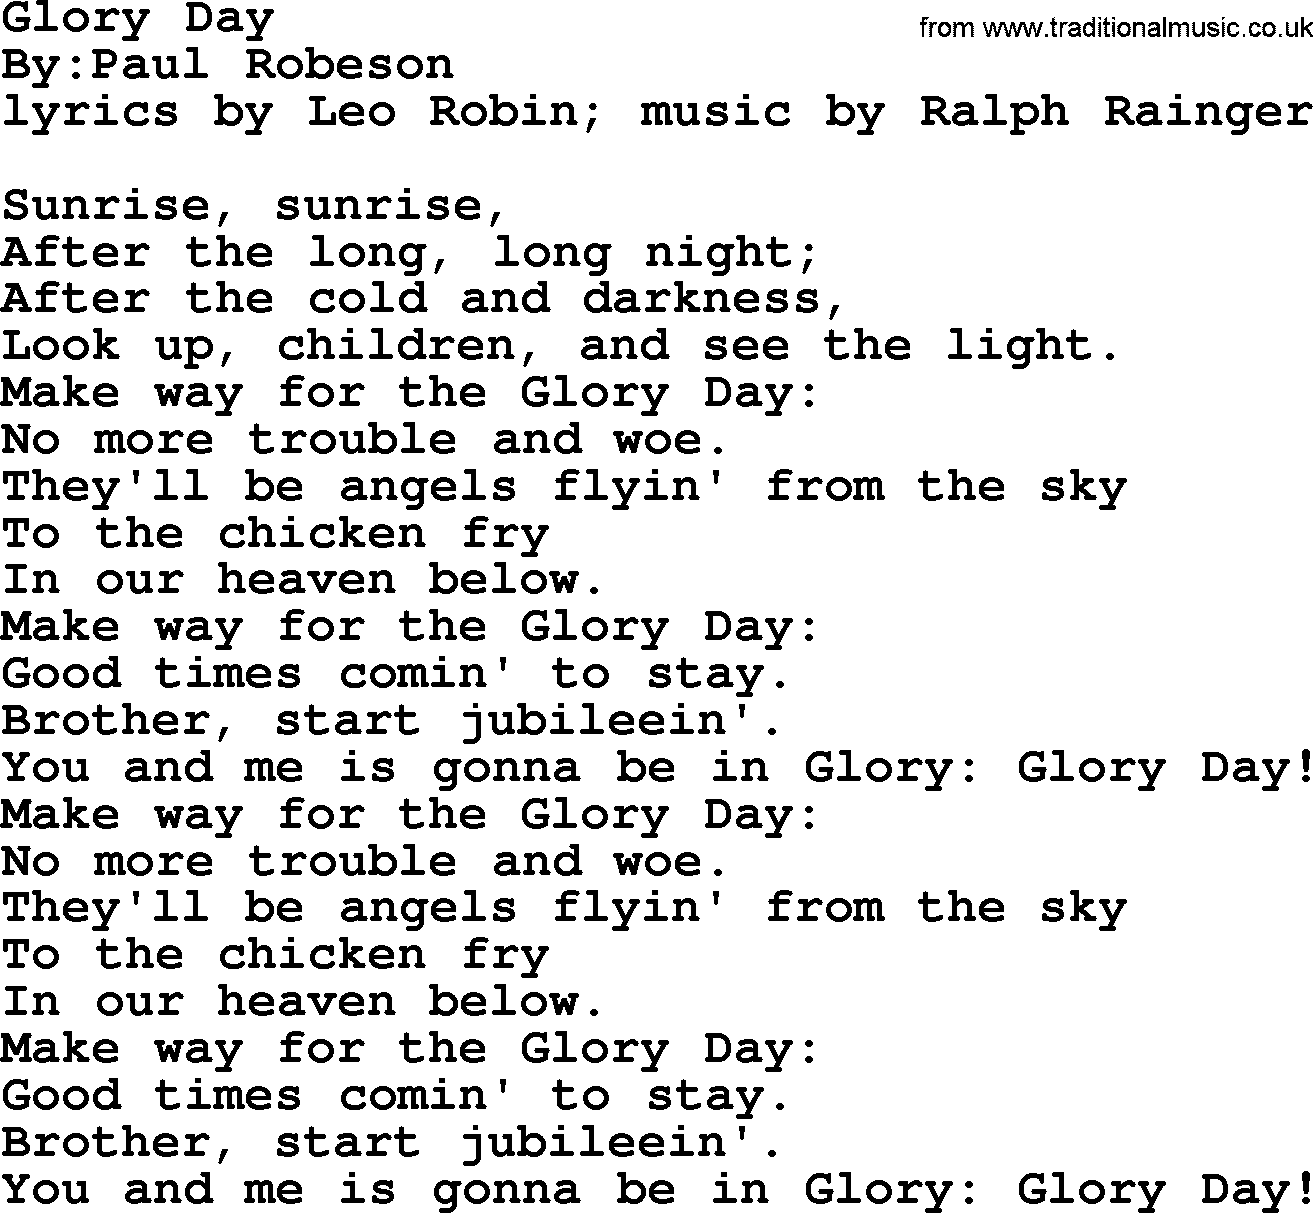 Political, Solidarity, Workers or Union song: Glory Day, lyrics